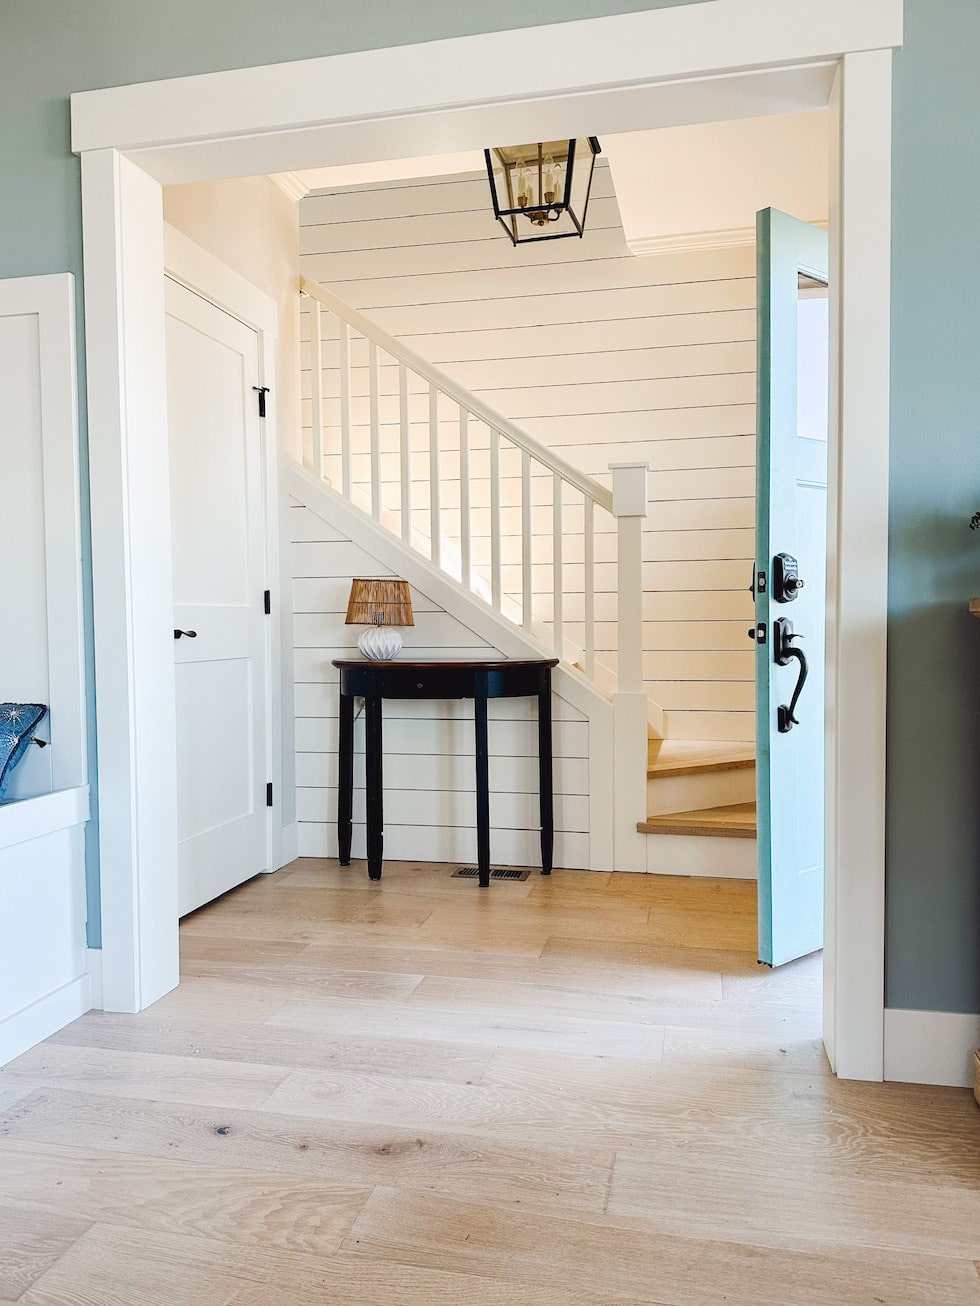 Renovation Update: Wood Floors Upstairs, Paint, Moving Our Things Into Place + Life Lately!